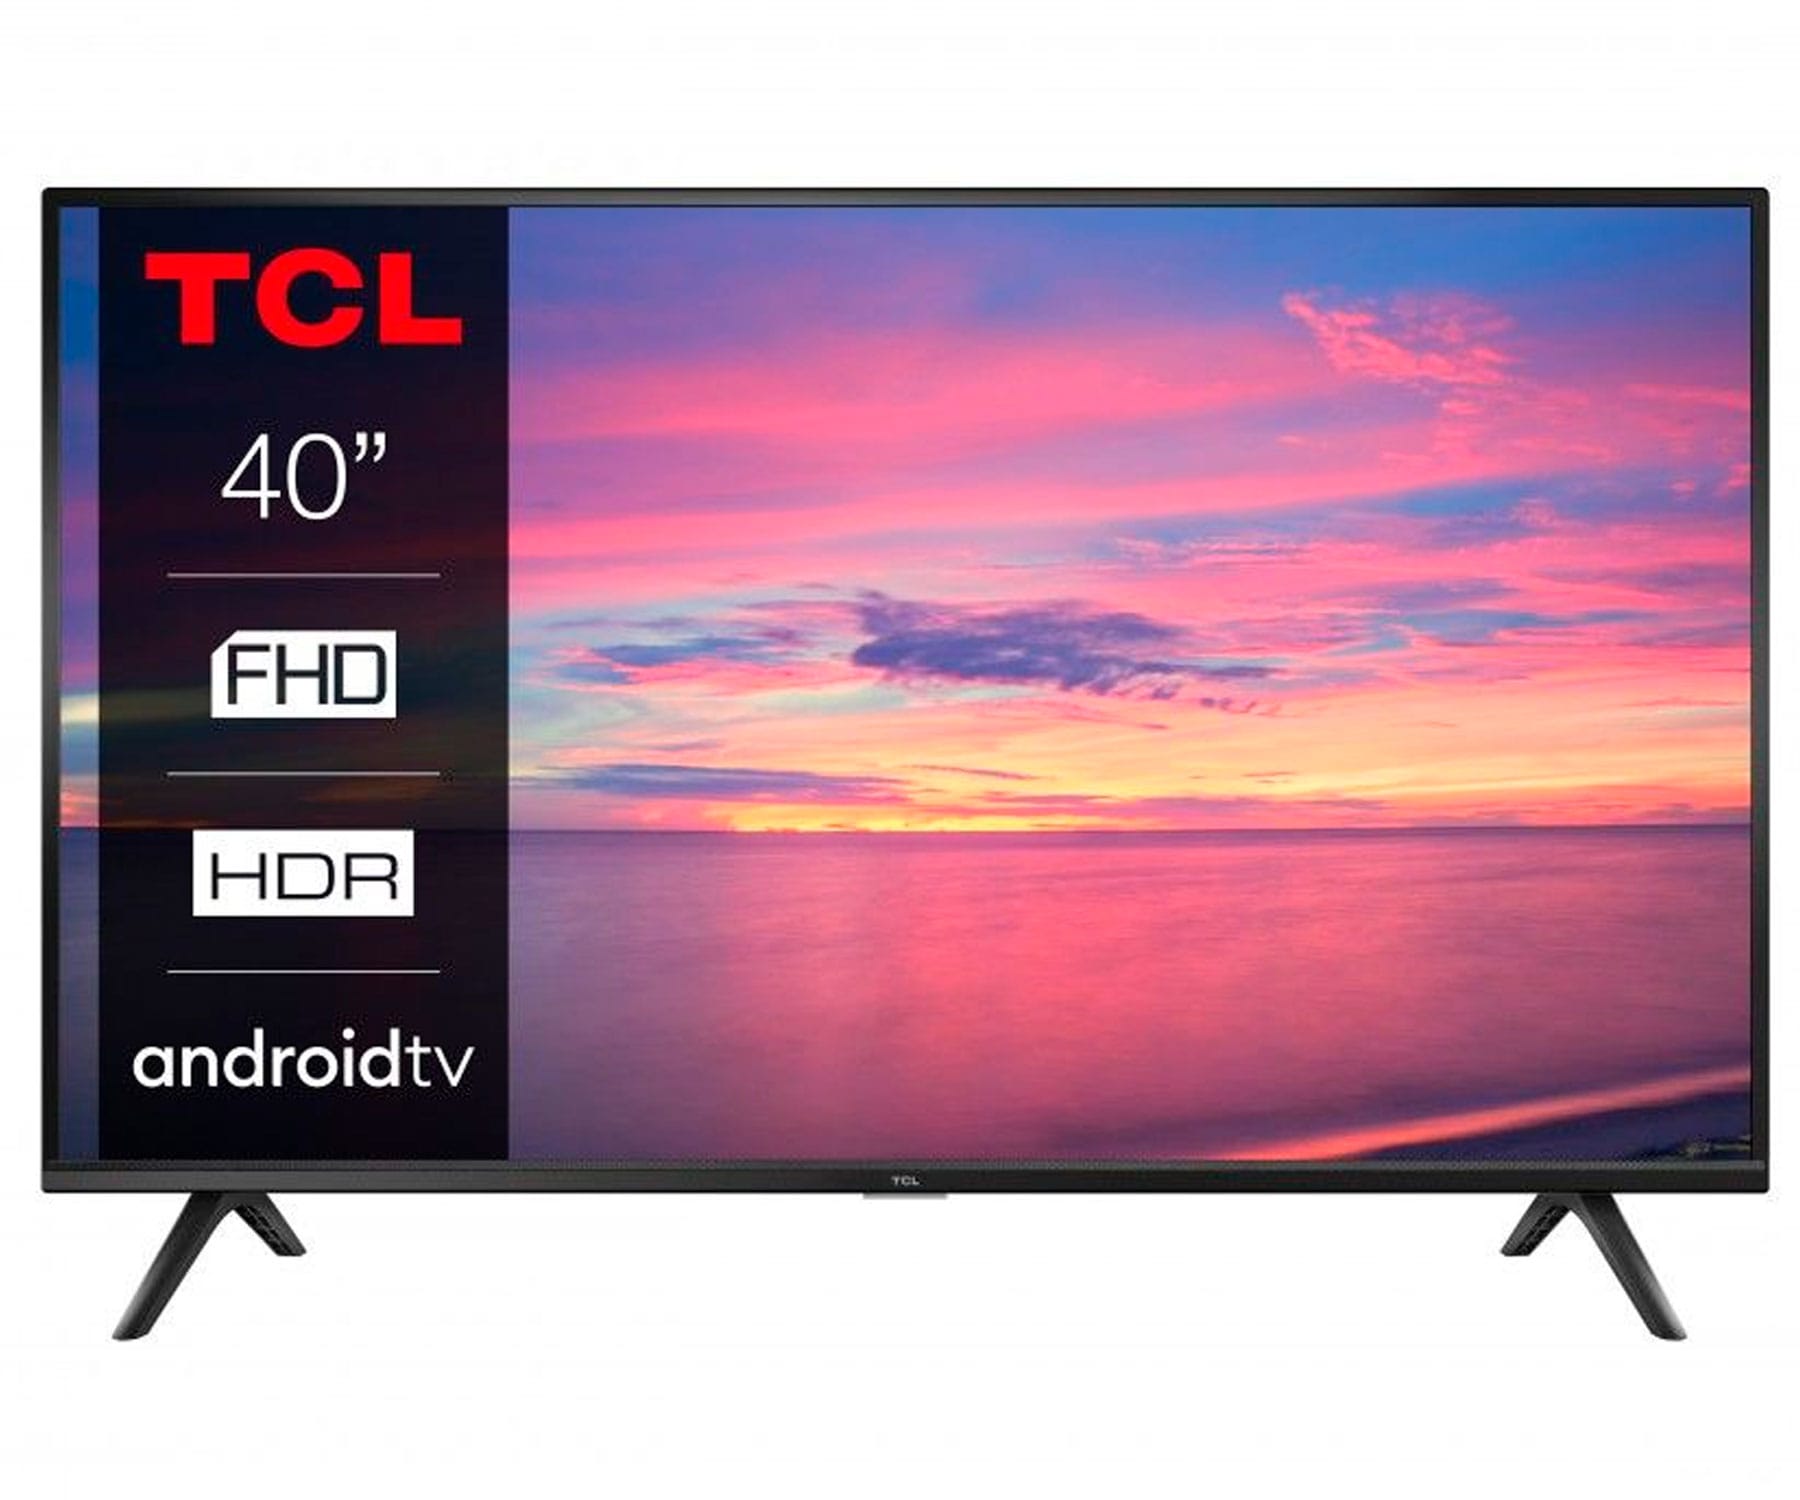 TCL 40S5200 Televisor Android TV 40" Full HD HDR